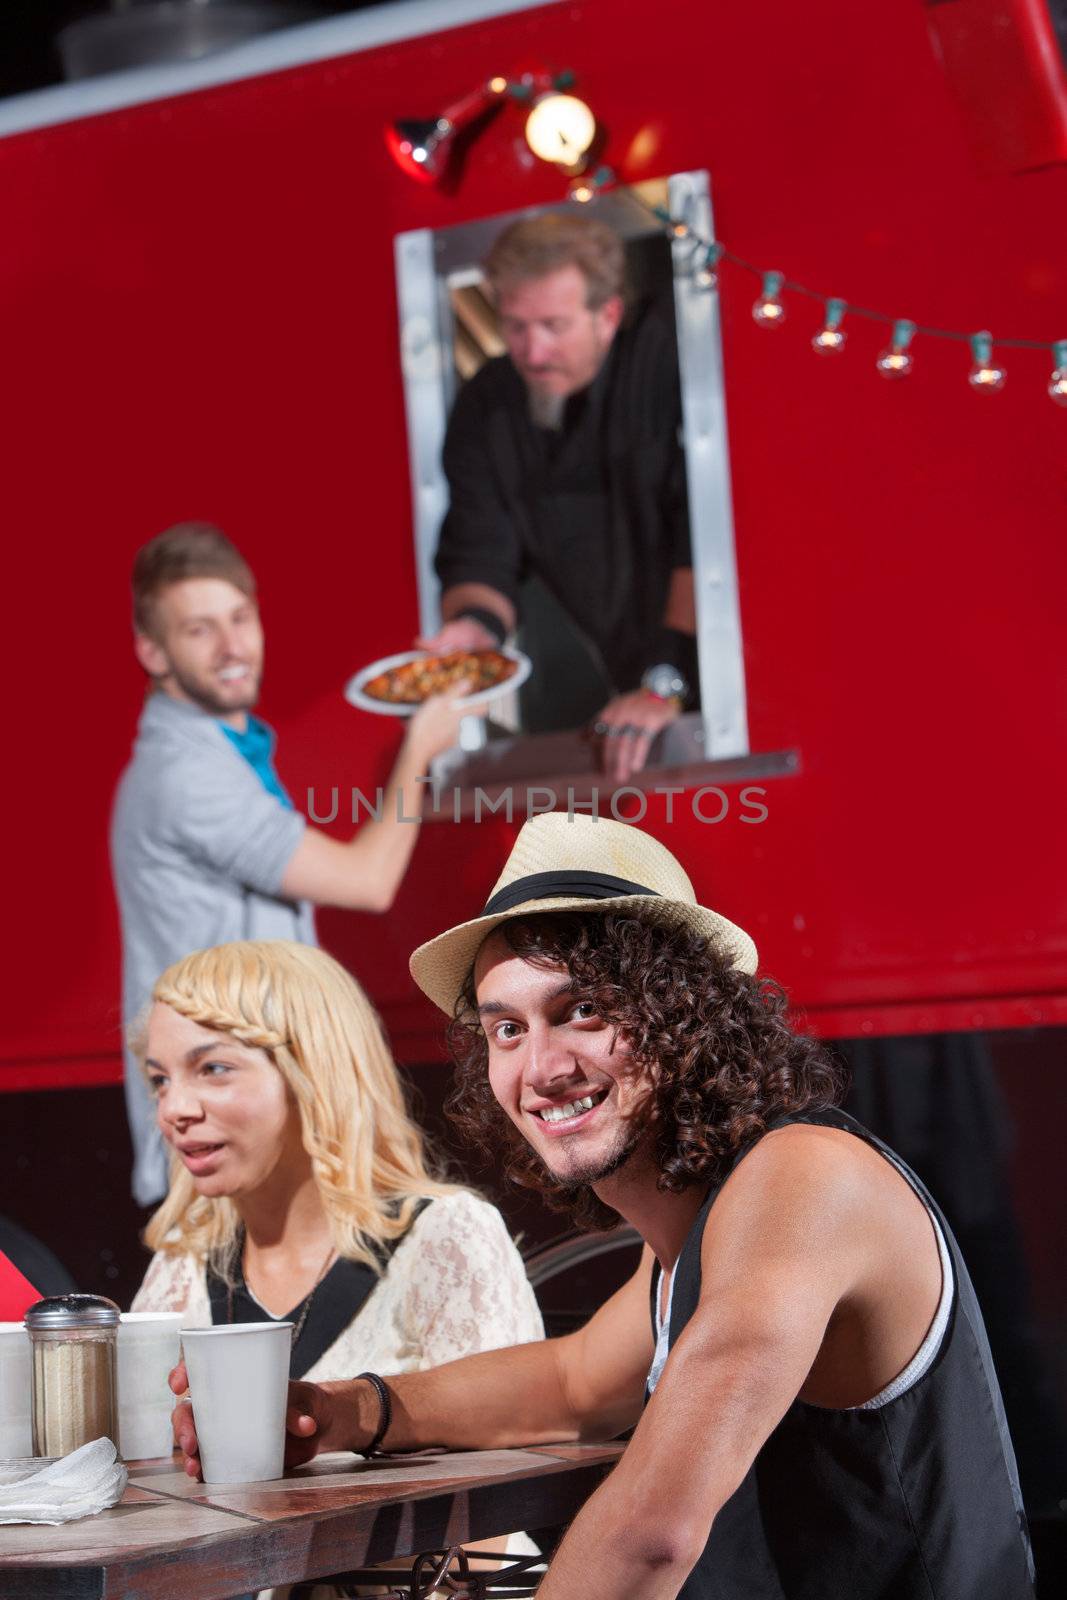 Caucasian male at table with friends ordering pizza